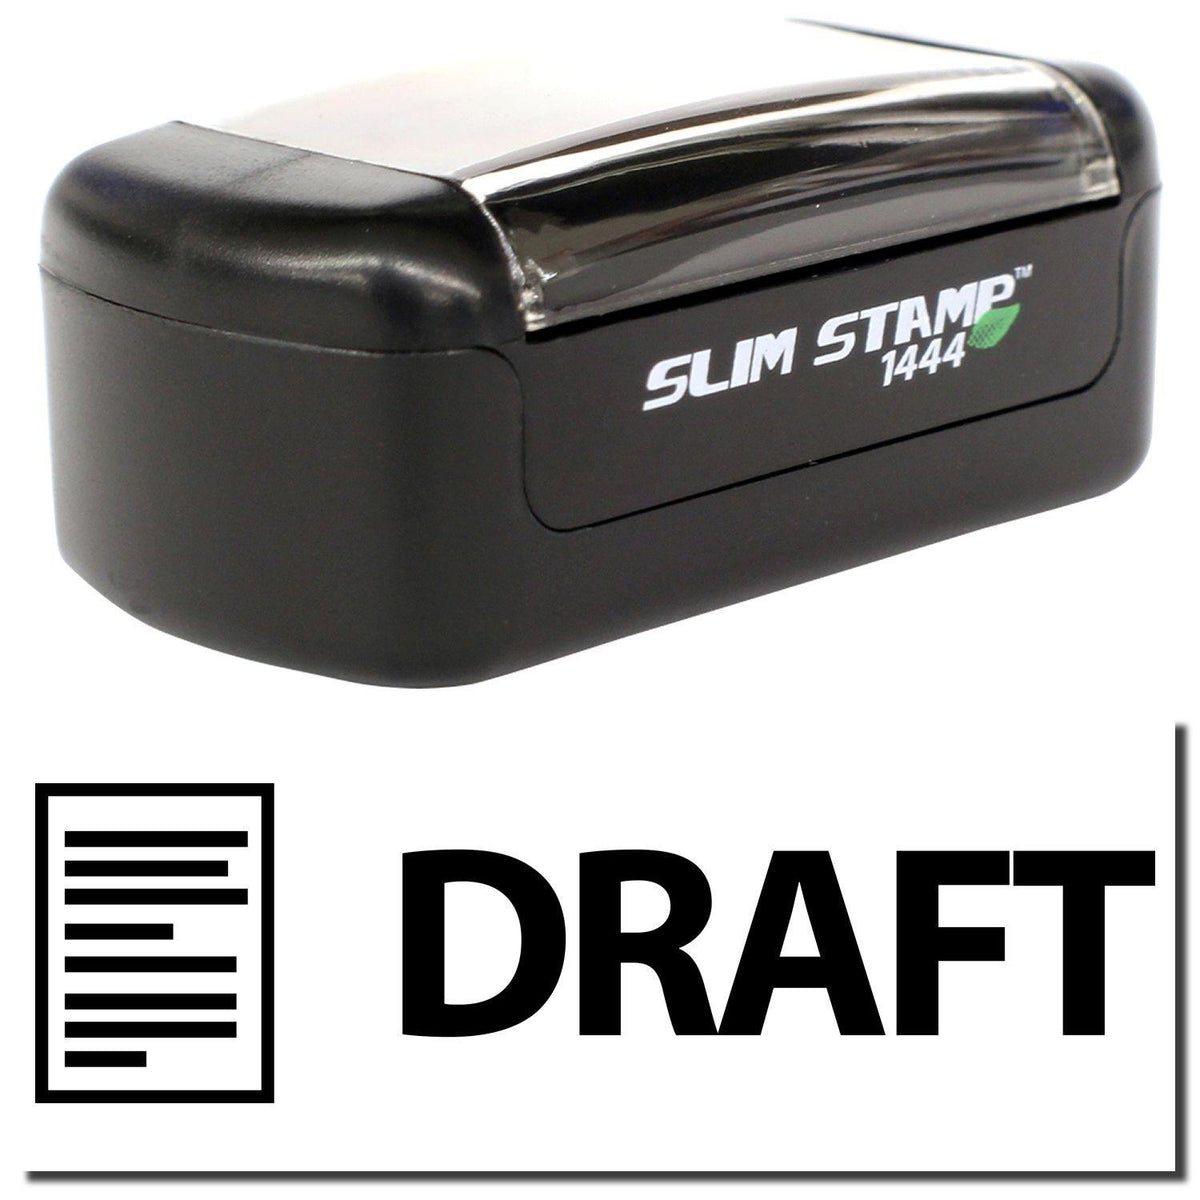 A stock office pre-inked stamp with a stamped image showing how the text &quot;DRAFT&quot; with an image of a letter on the left side is displayed after stamping.